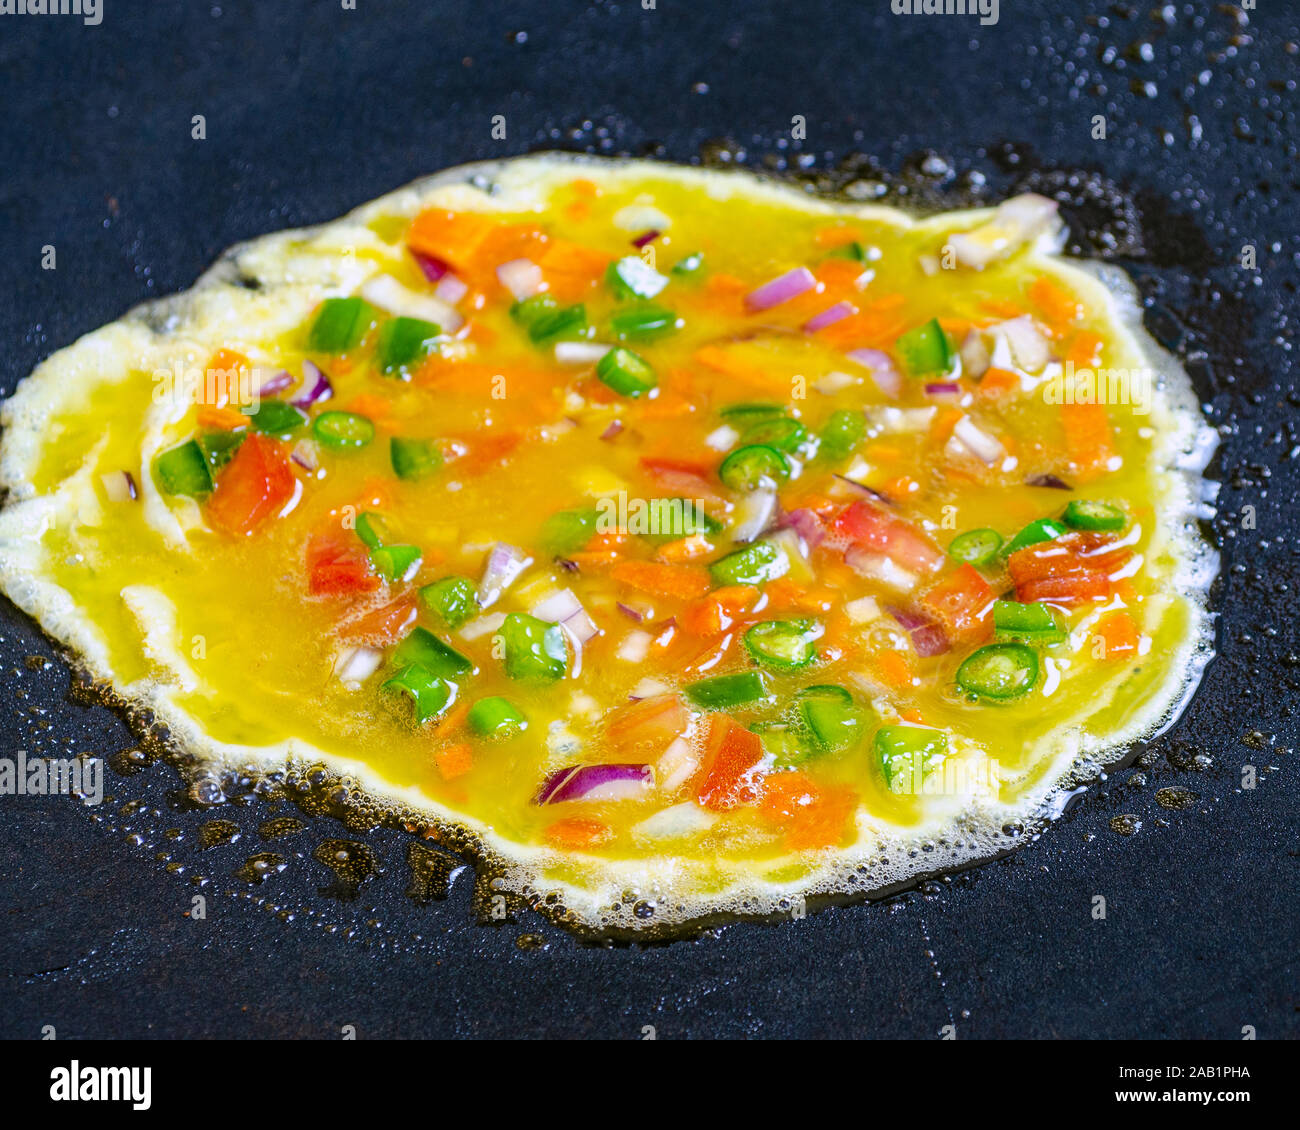 Preparing an egg omelette on a hot frying pan. Stock Photo